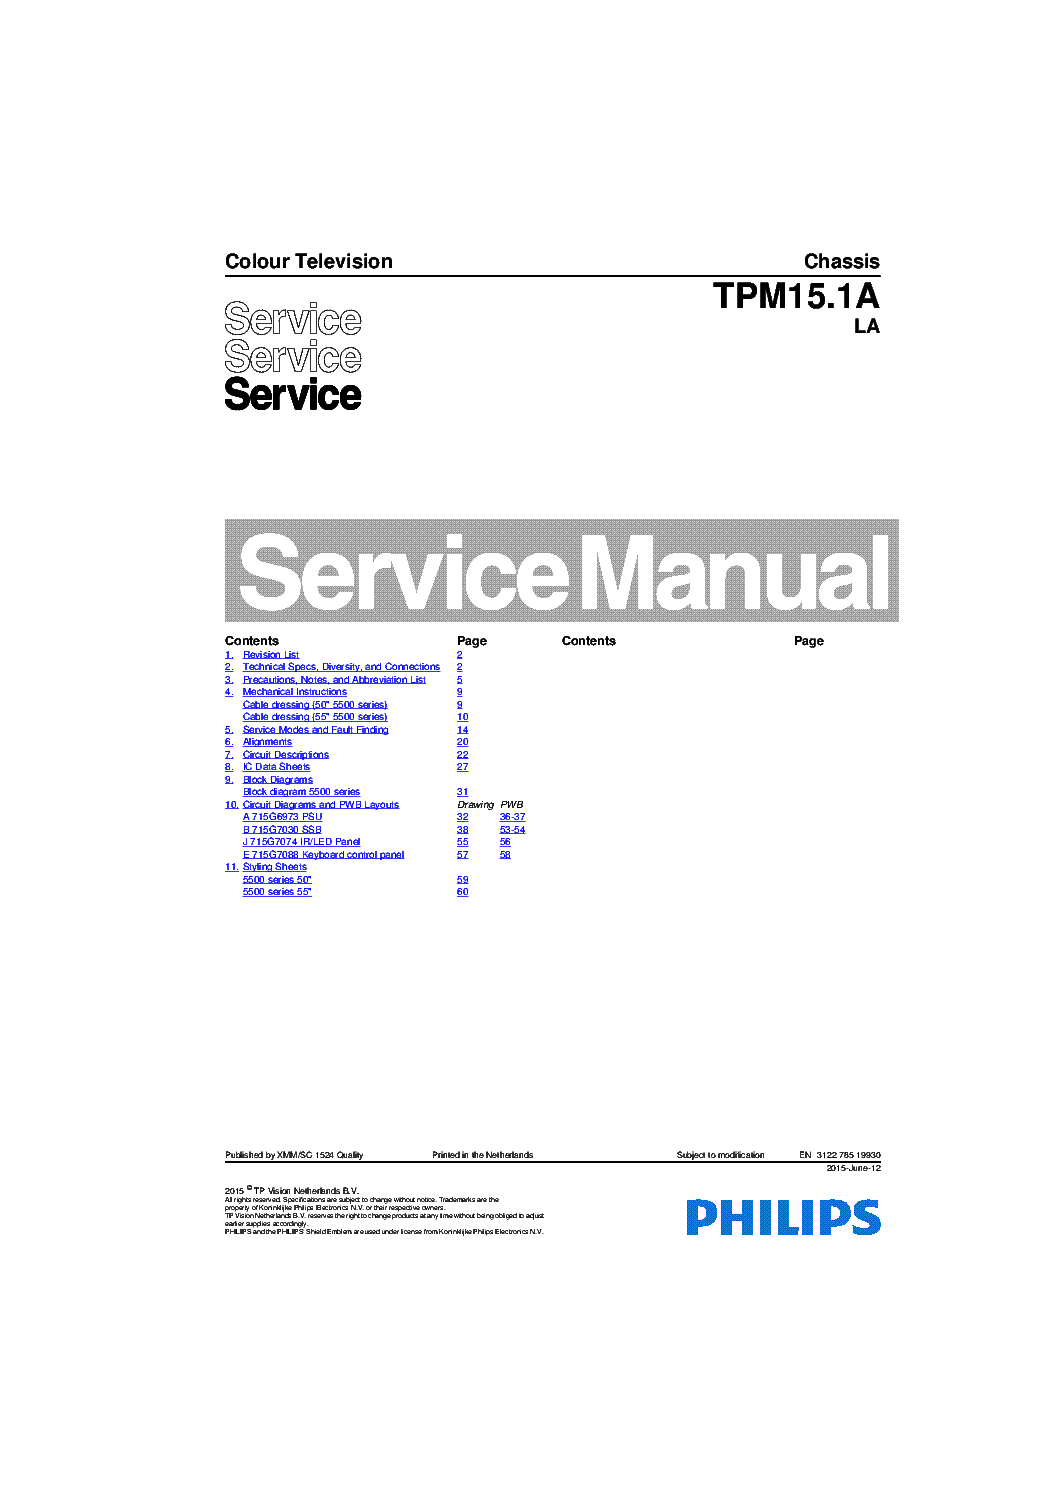 PHILIPS TPM15.1ALA 312278519930 150612 service manual (1st page)